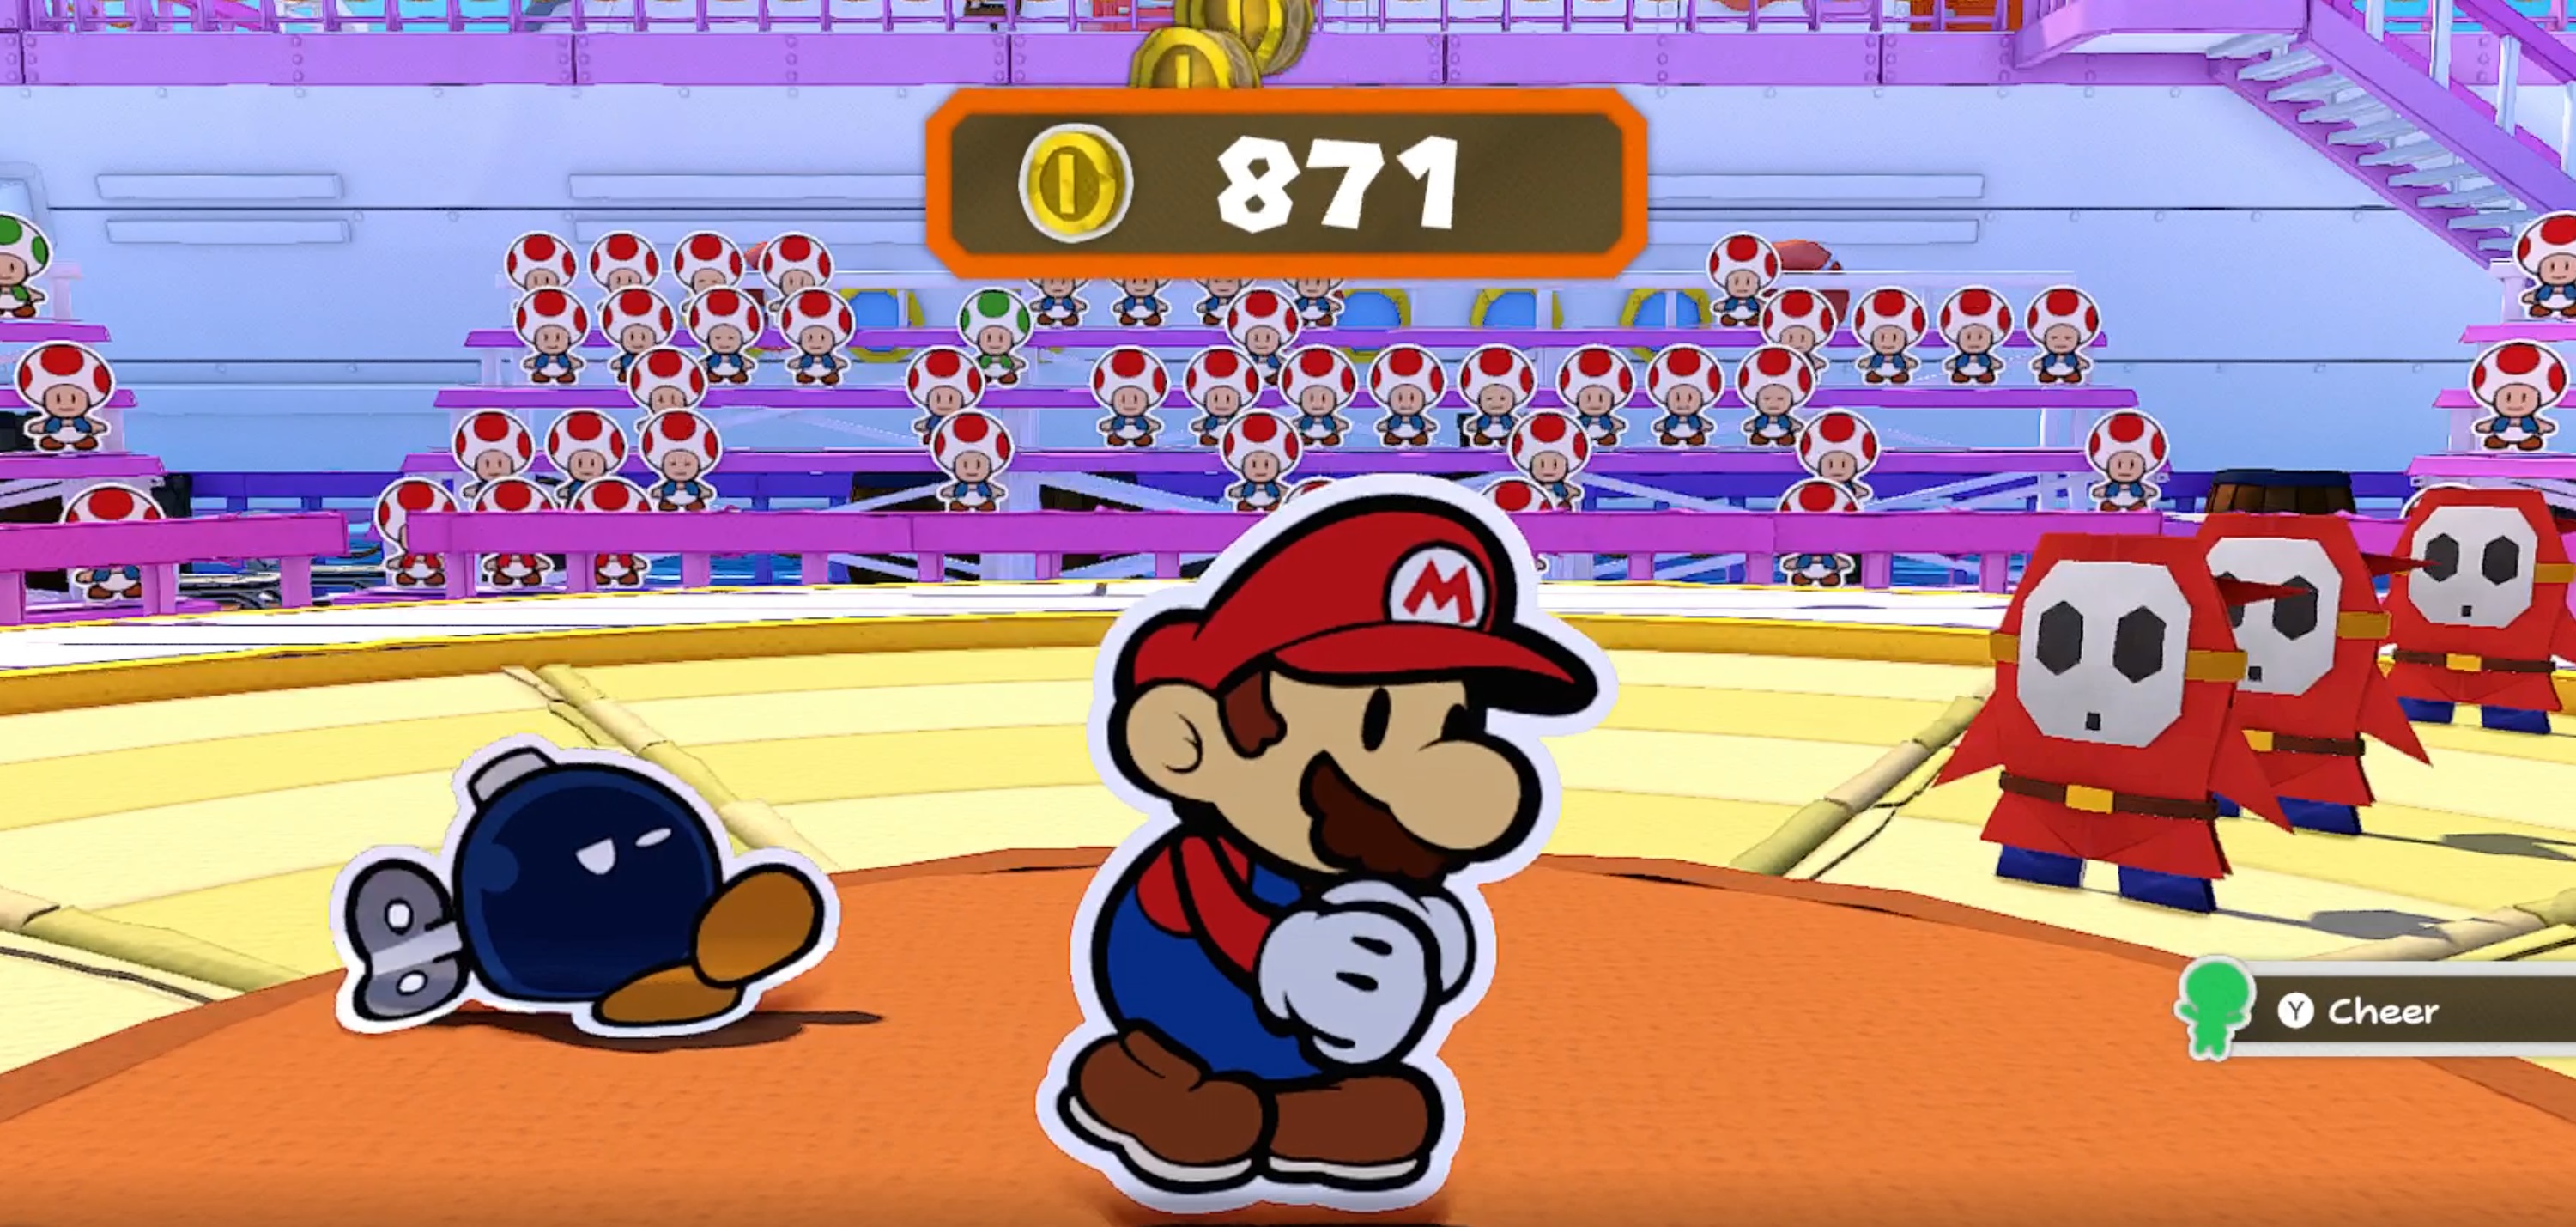 Comment payer les crapauds dans Paper Mario: The Origami King